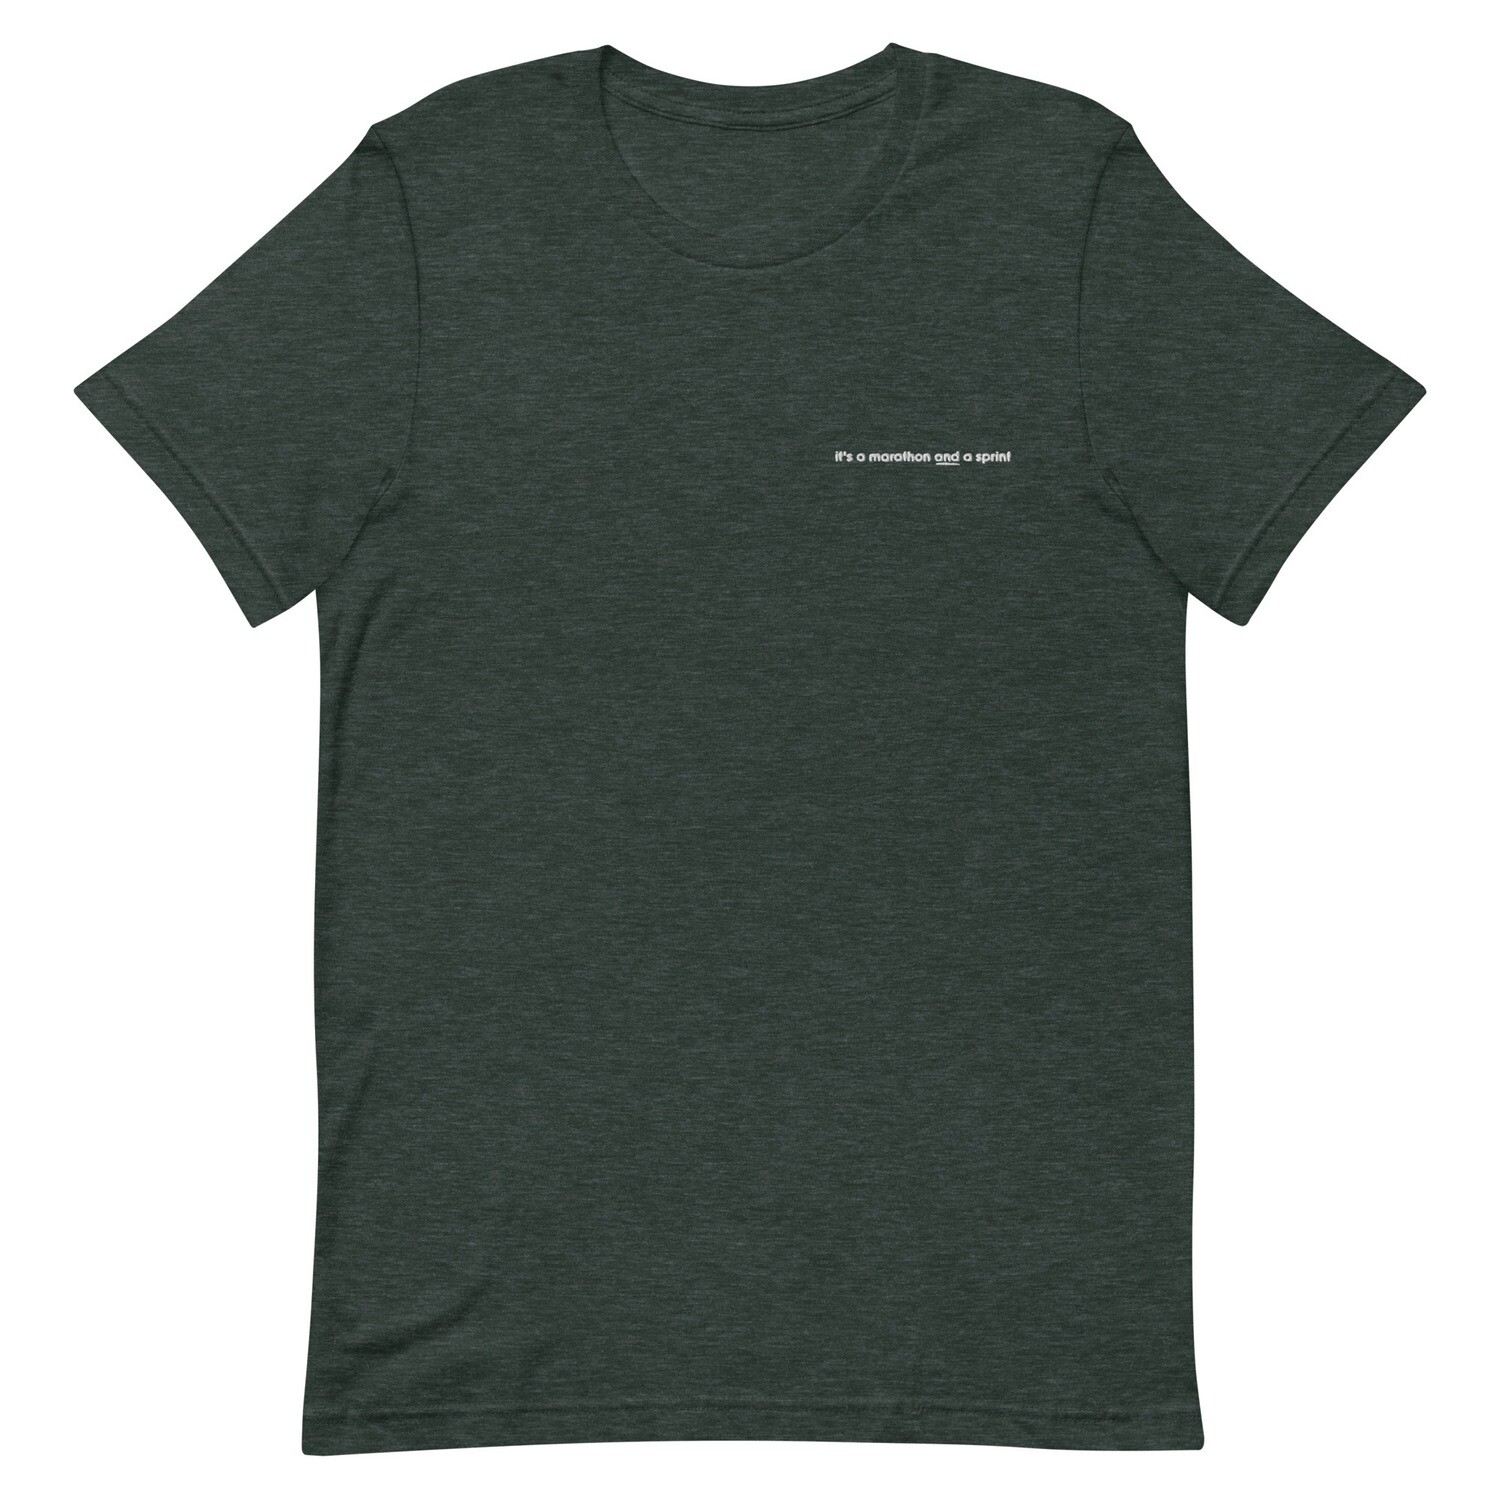 The Product Manager Tee